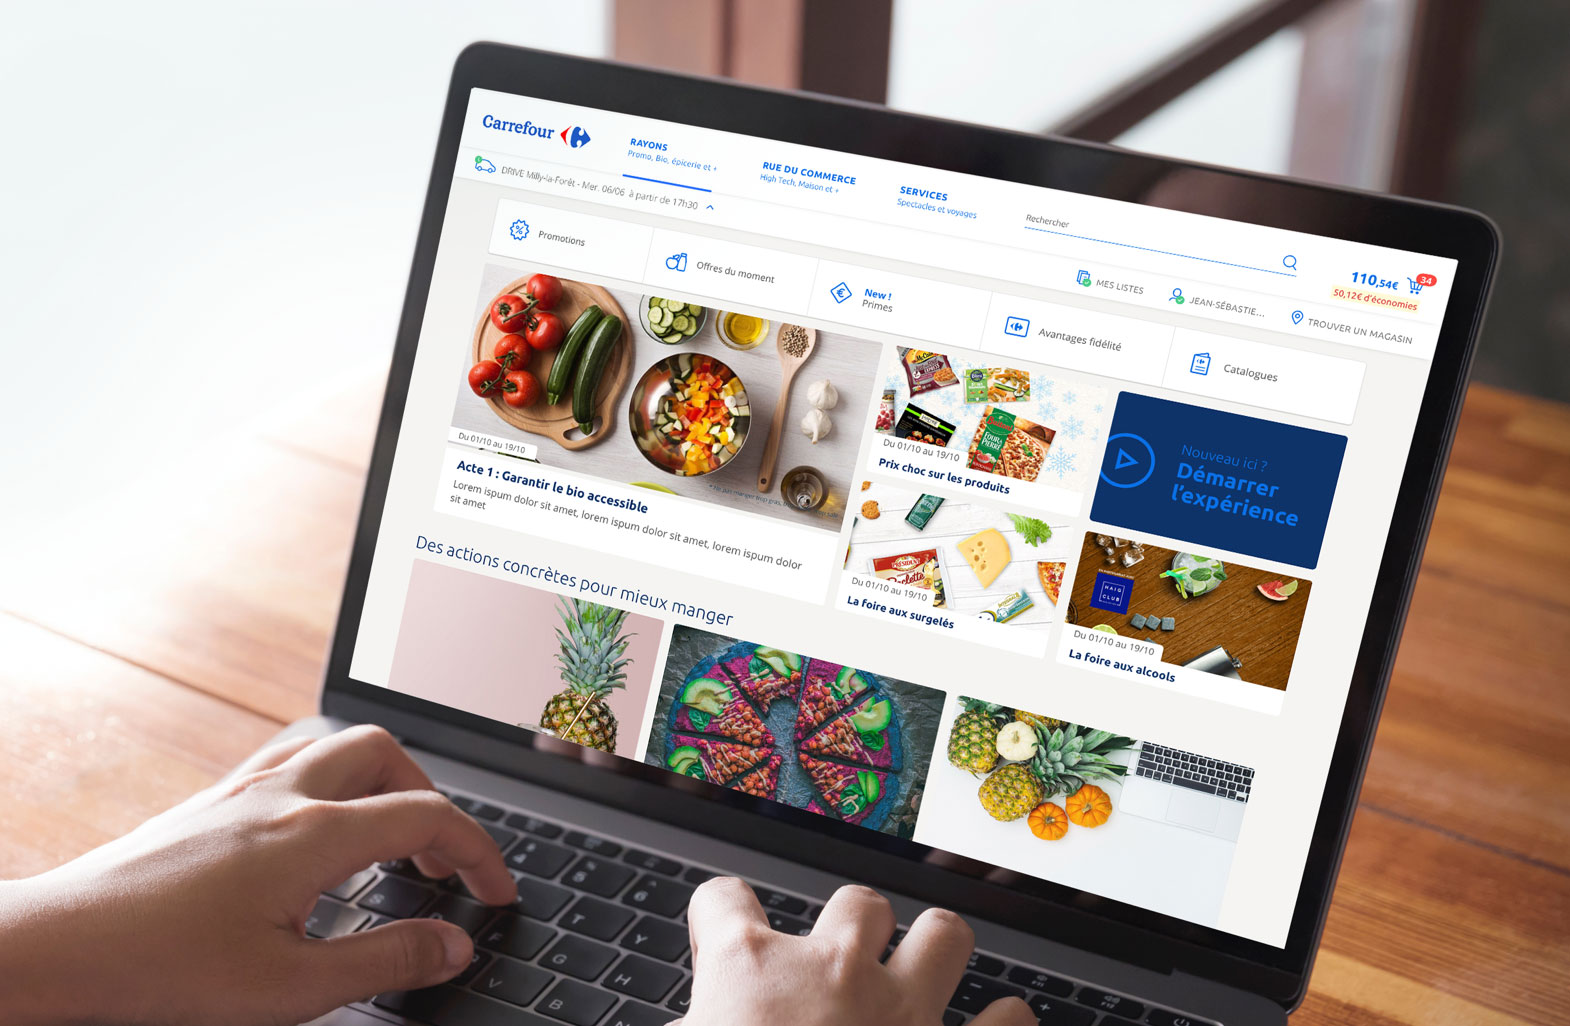 Carrefour Launches E-commerce in 6 Months